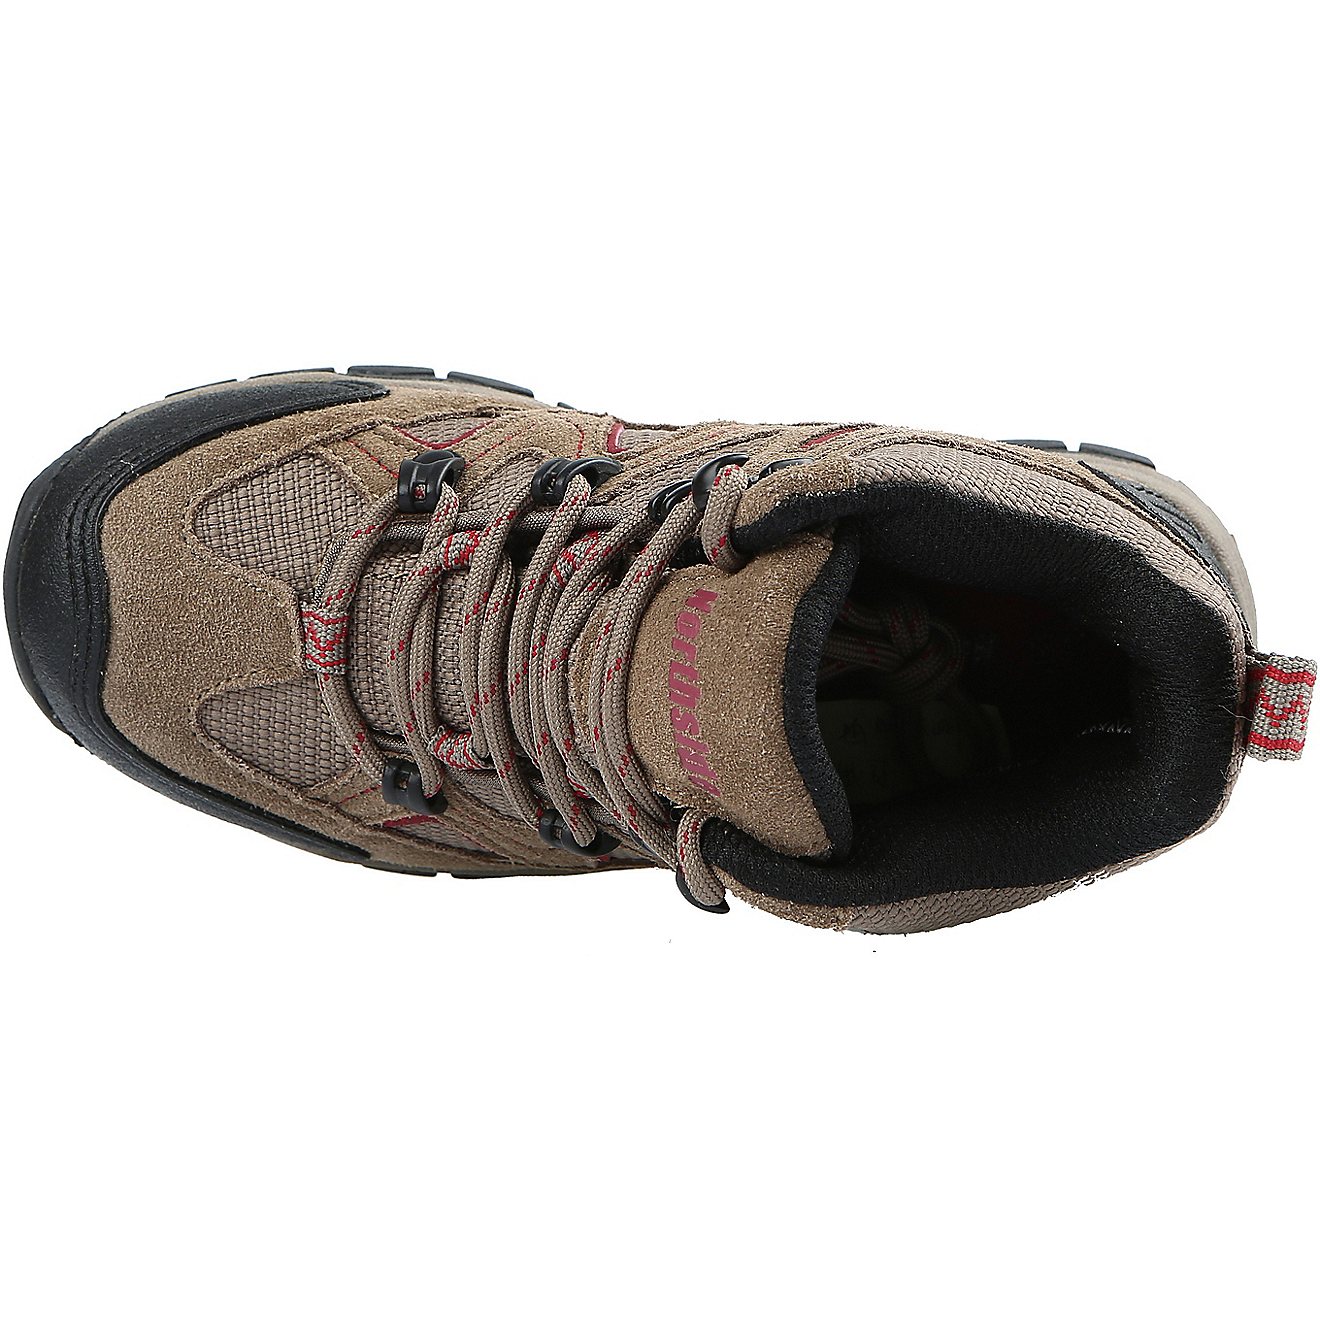 Northside Kids' 4-7 Snohomish Waterproof Hiking Boots                                                                            - view number 3